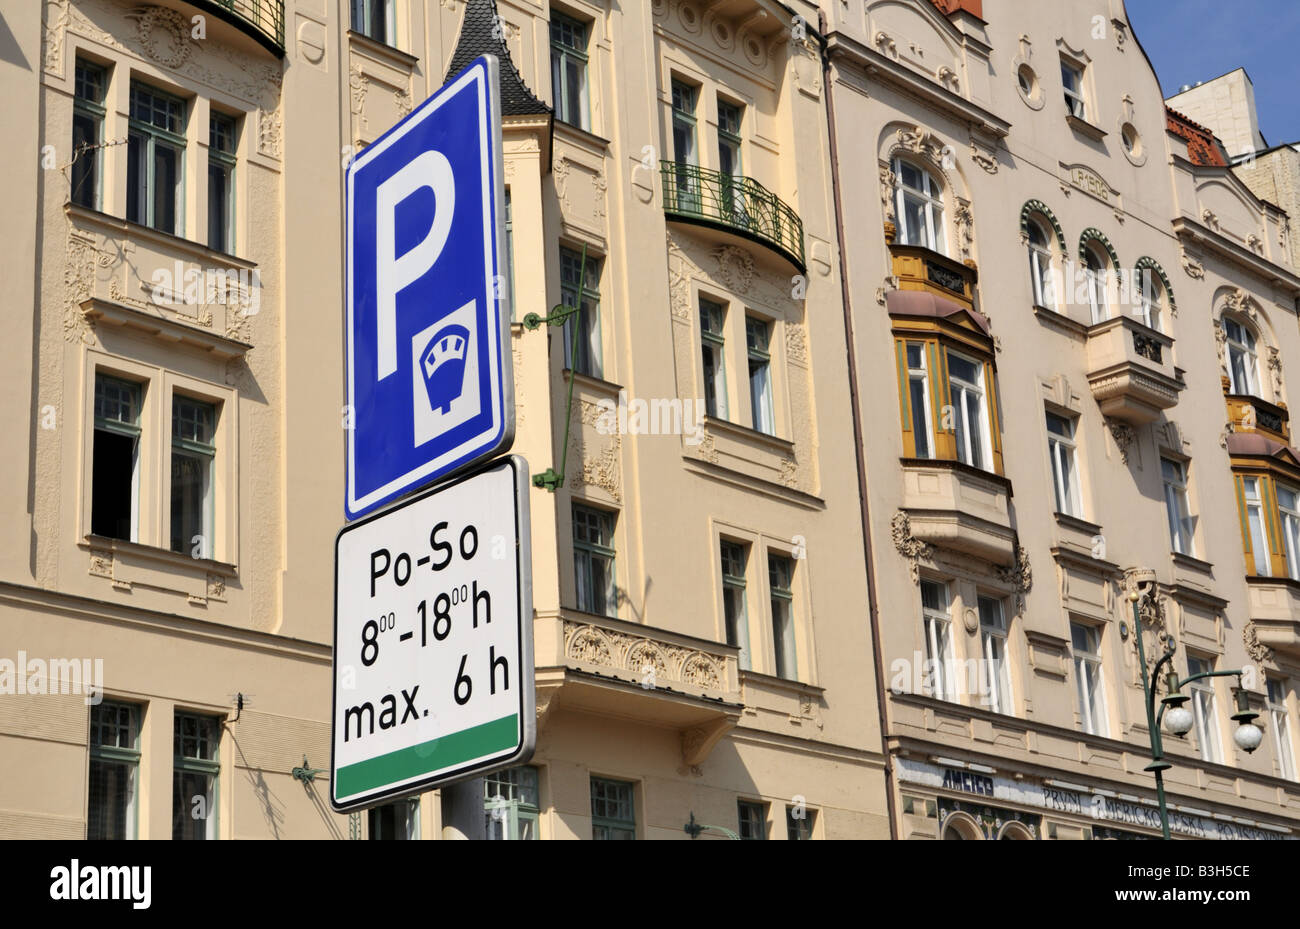 Maximum 6 hours of metered parking on Parizska street between 8 am and 6 pm in the Josefov district of Prague, Czech Republic. Stock Photo